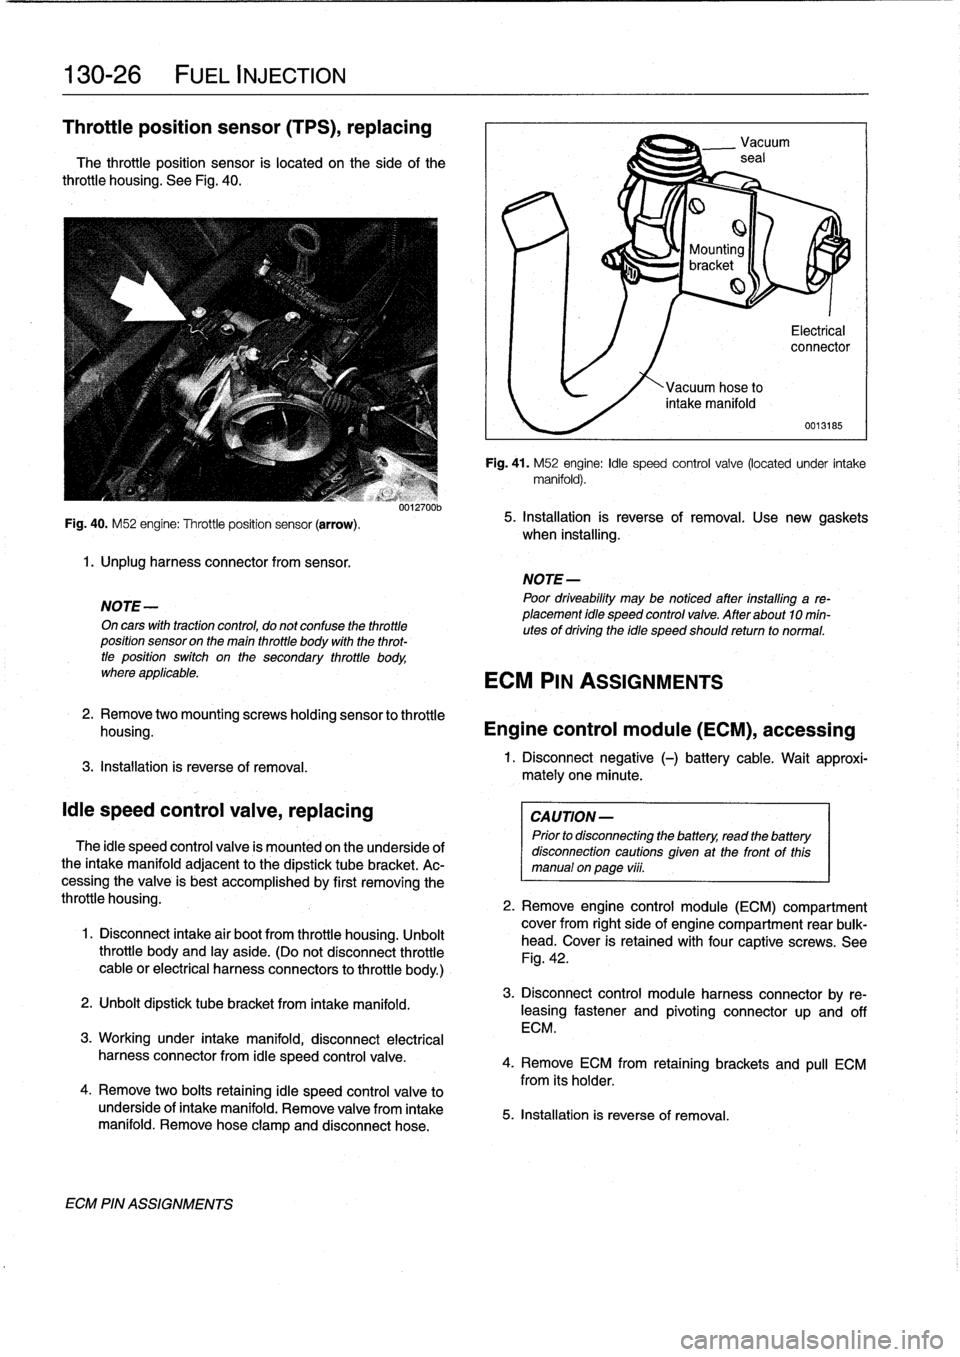 BMW 325i 1997 E36 Workshop Manual 
130-26

	

FUEL
INJECTION

Throttle
position
sensor
(TPS),
replacing

The
throttie
position
sensor
is
located
on
the
side
of
the
throttie
housing
.
See
Fig
.
40
.

Fig
.
40
.
M52
engine
:
Throttle
po